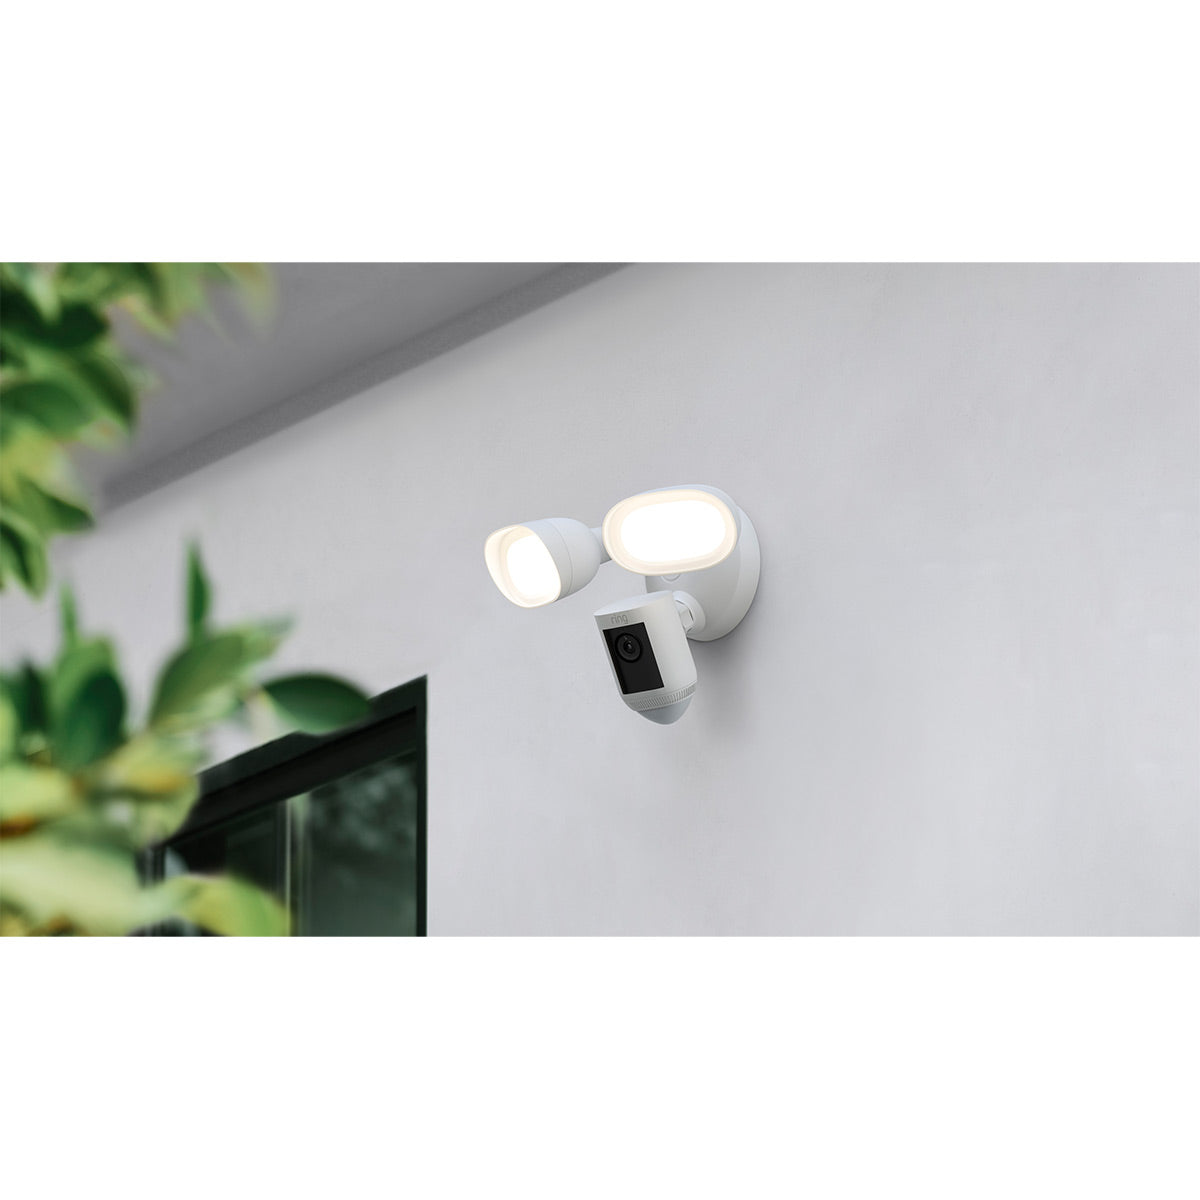 Ring Floodlight Cam Wired Pro (White)